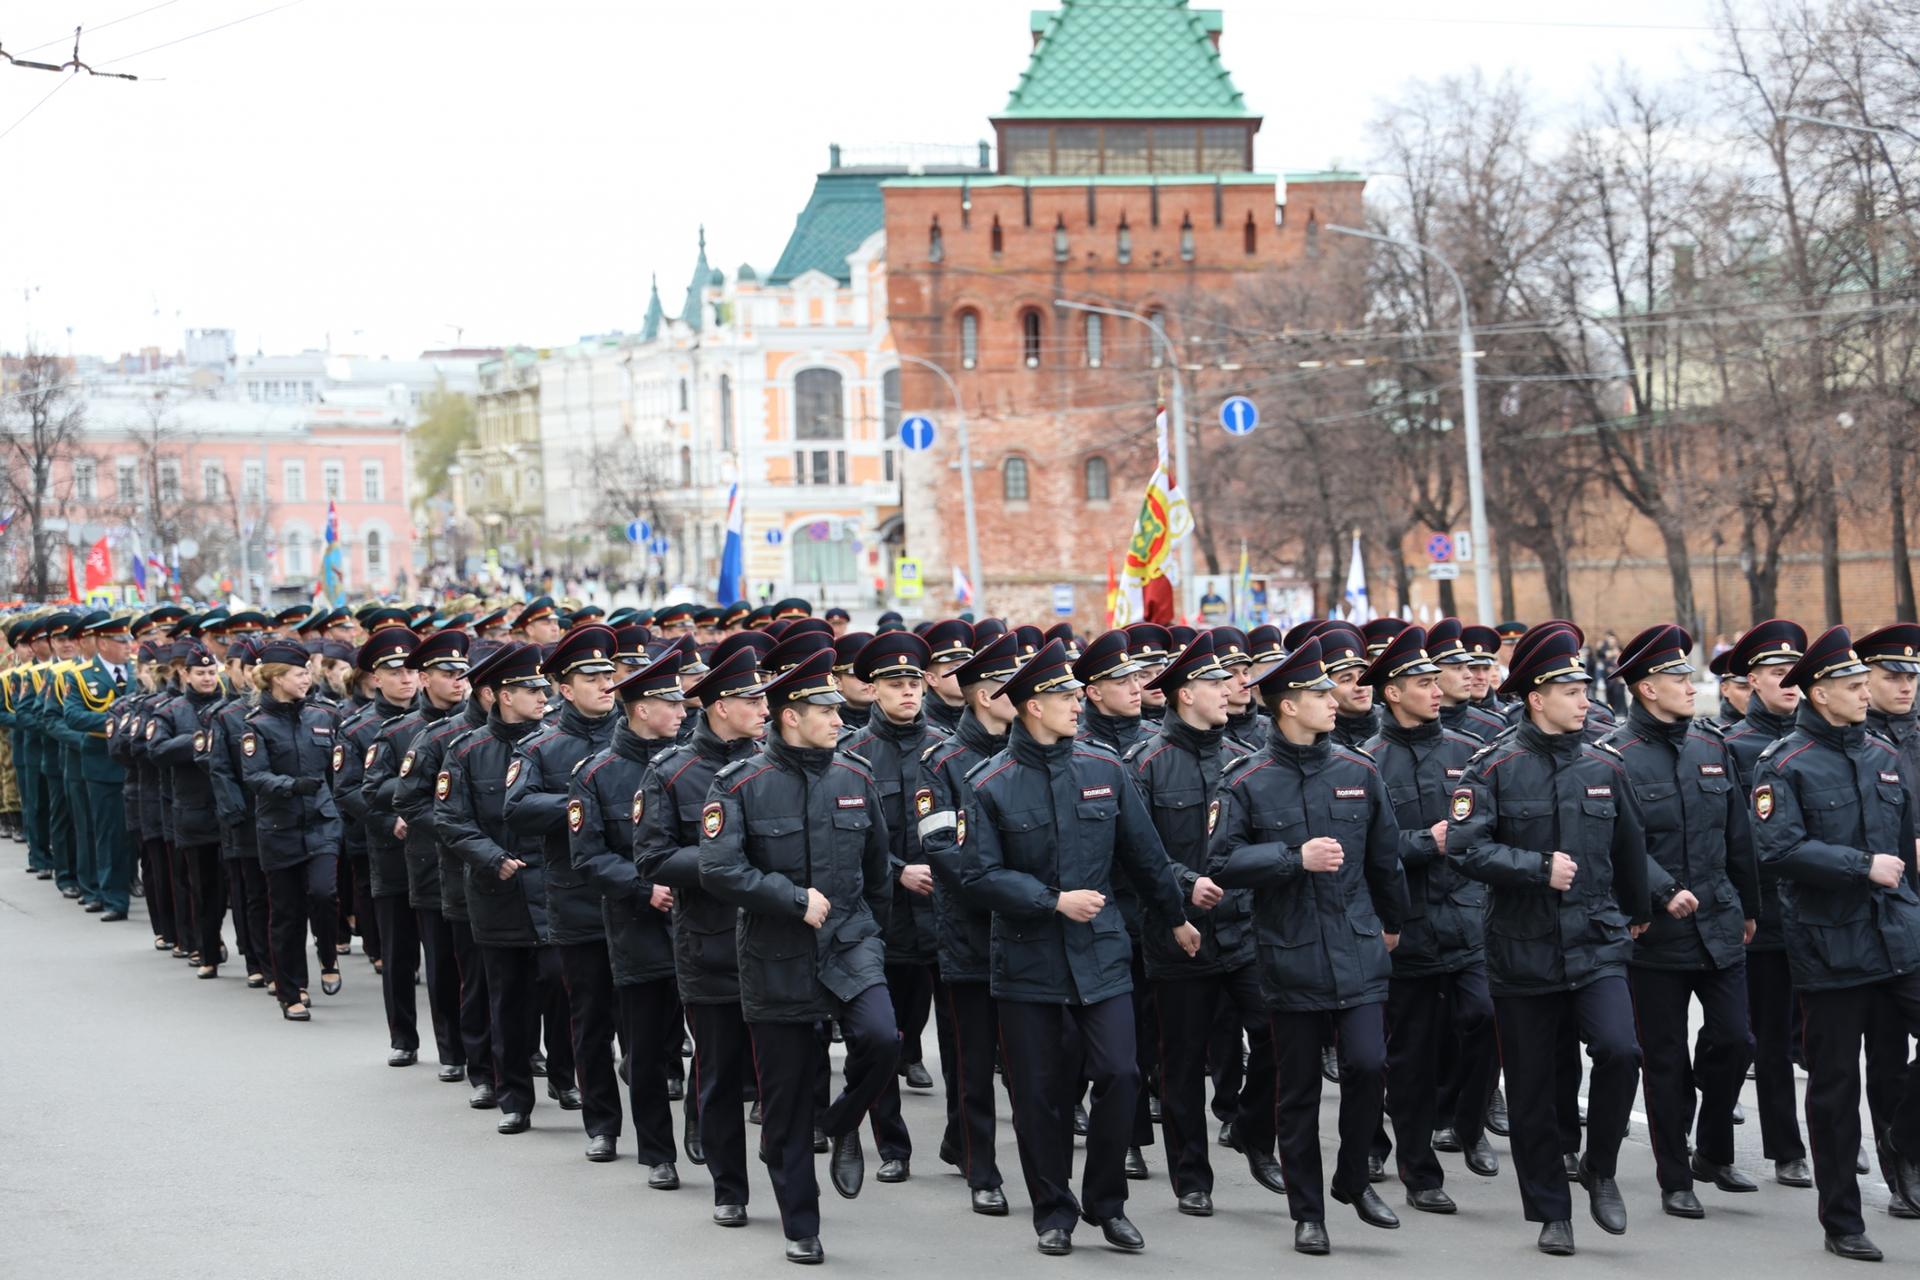 Men in miltary uniforms and formation march down a street